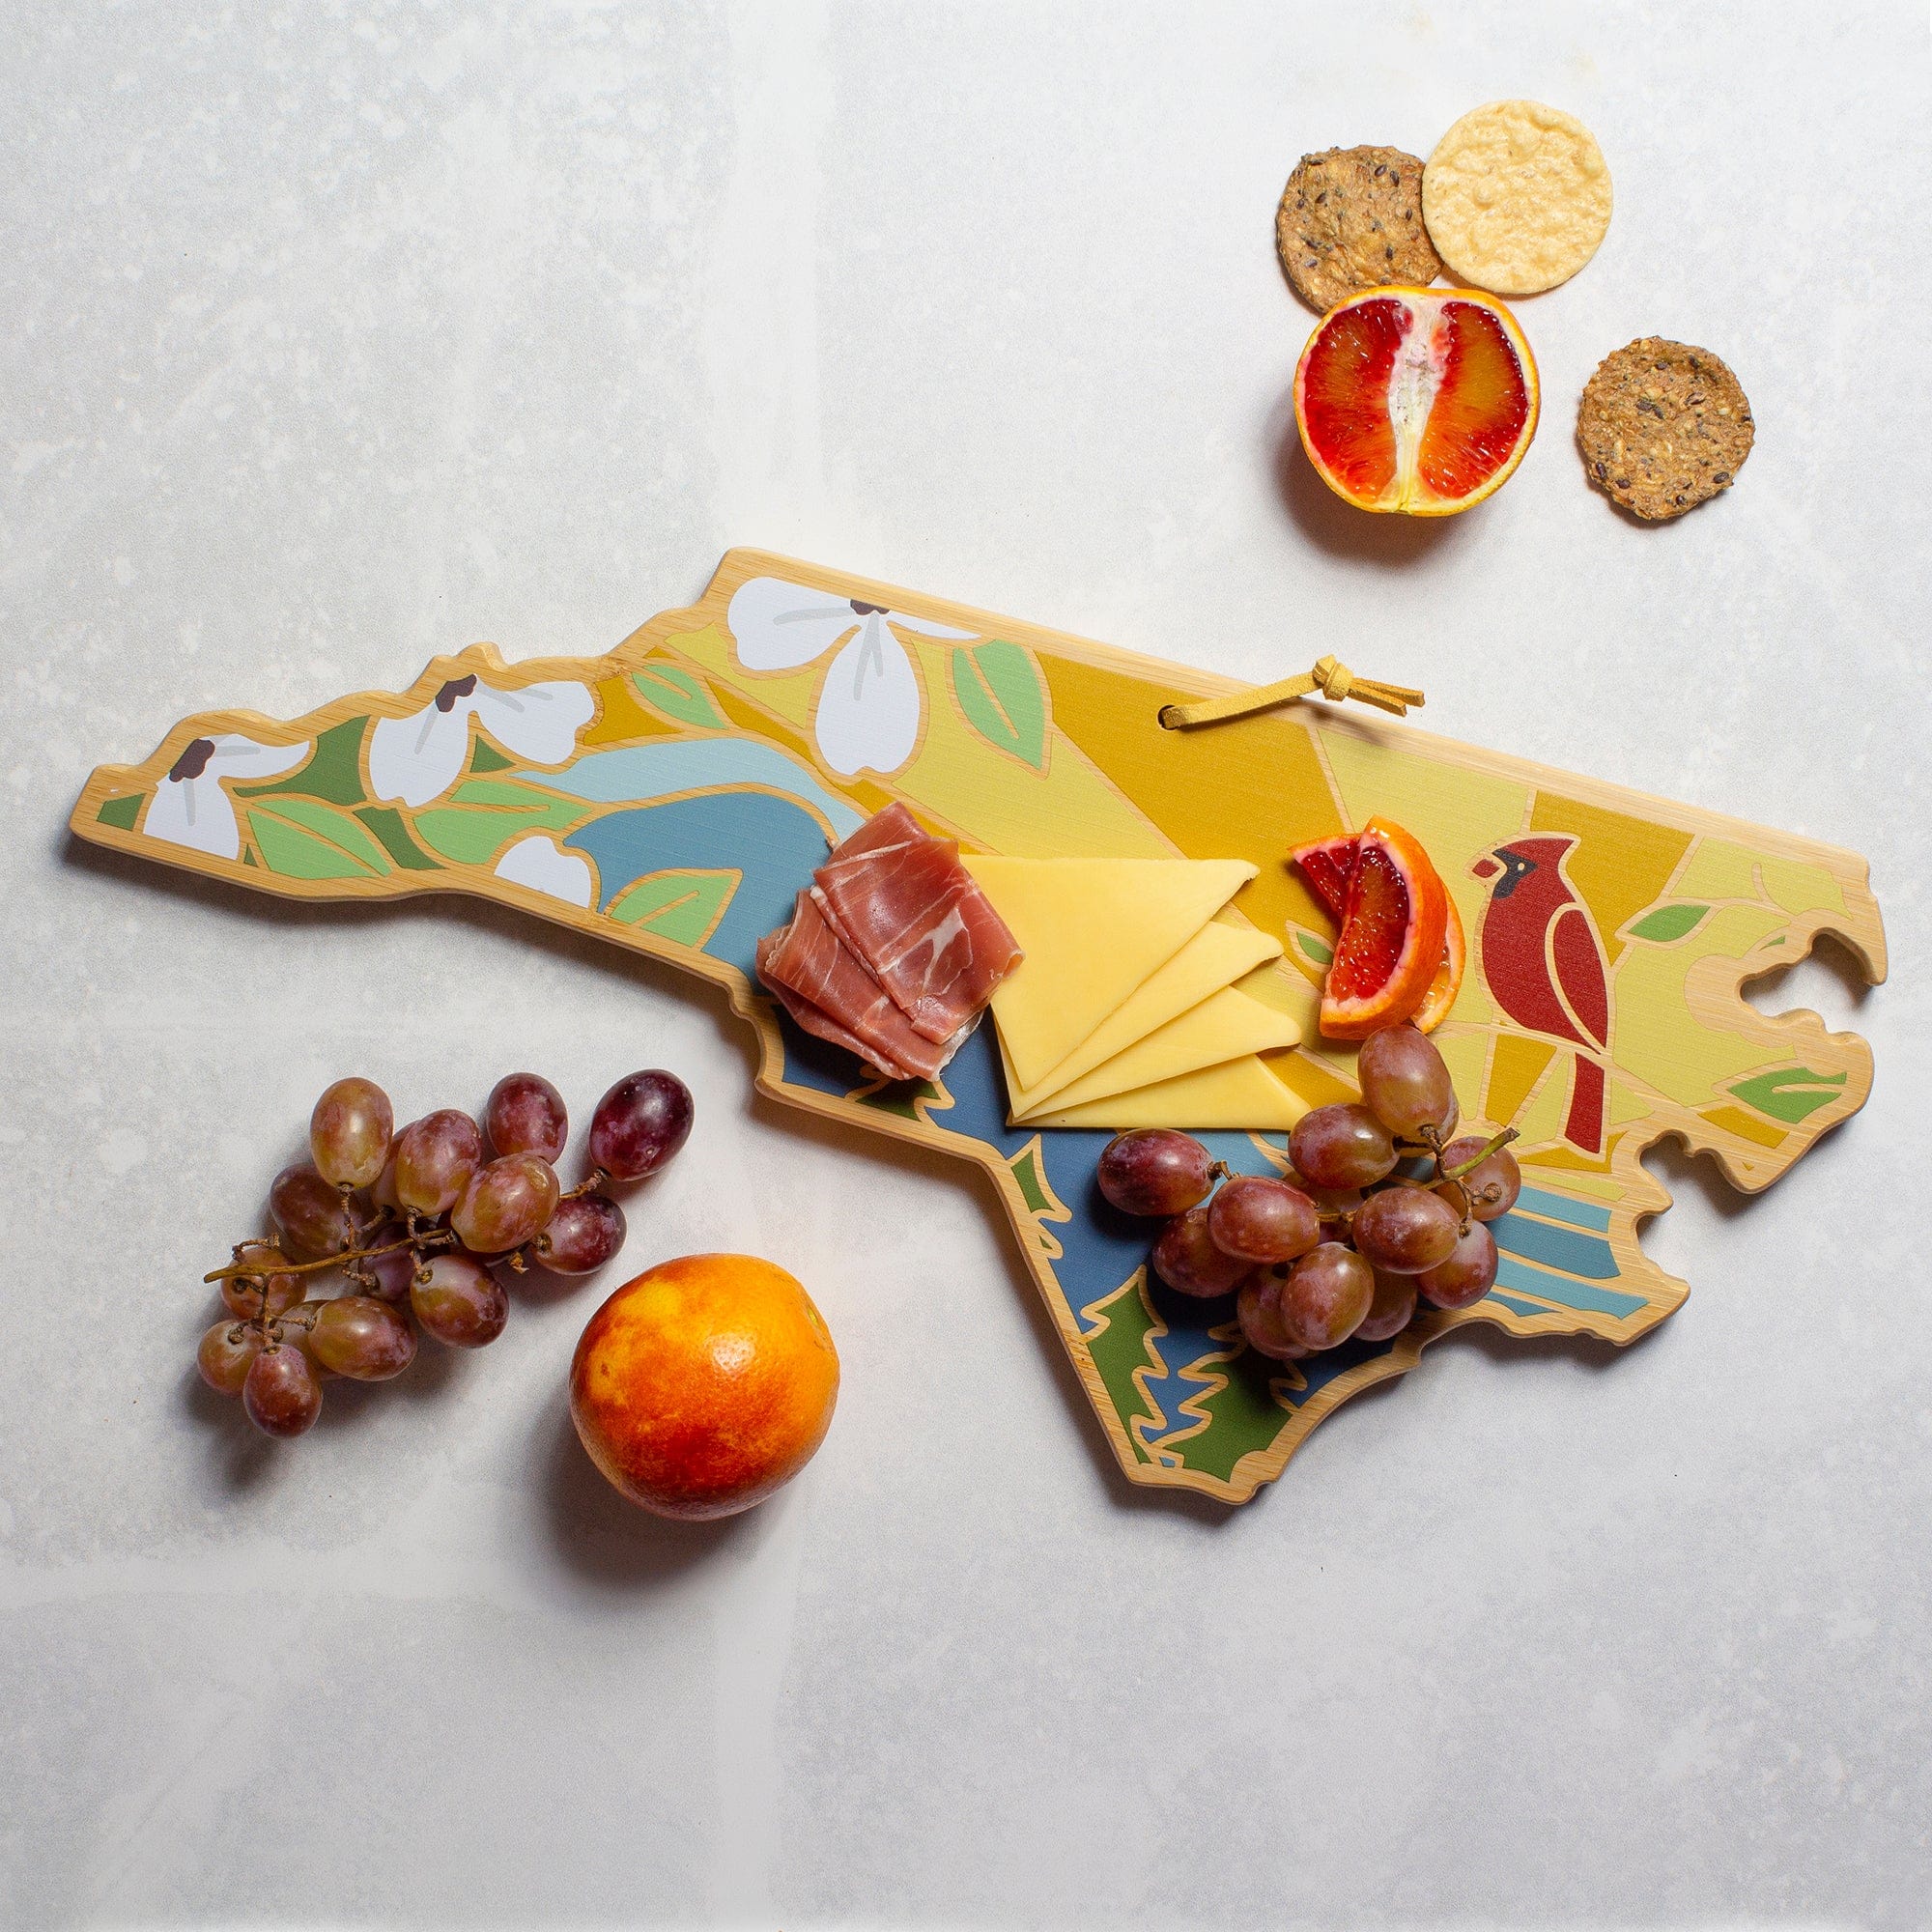 North Carolina State Shaped Serving and Cutting Board with Artwork by  Summer Stokes